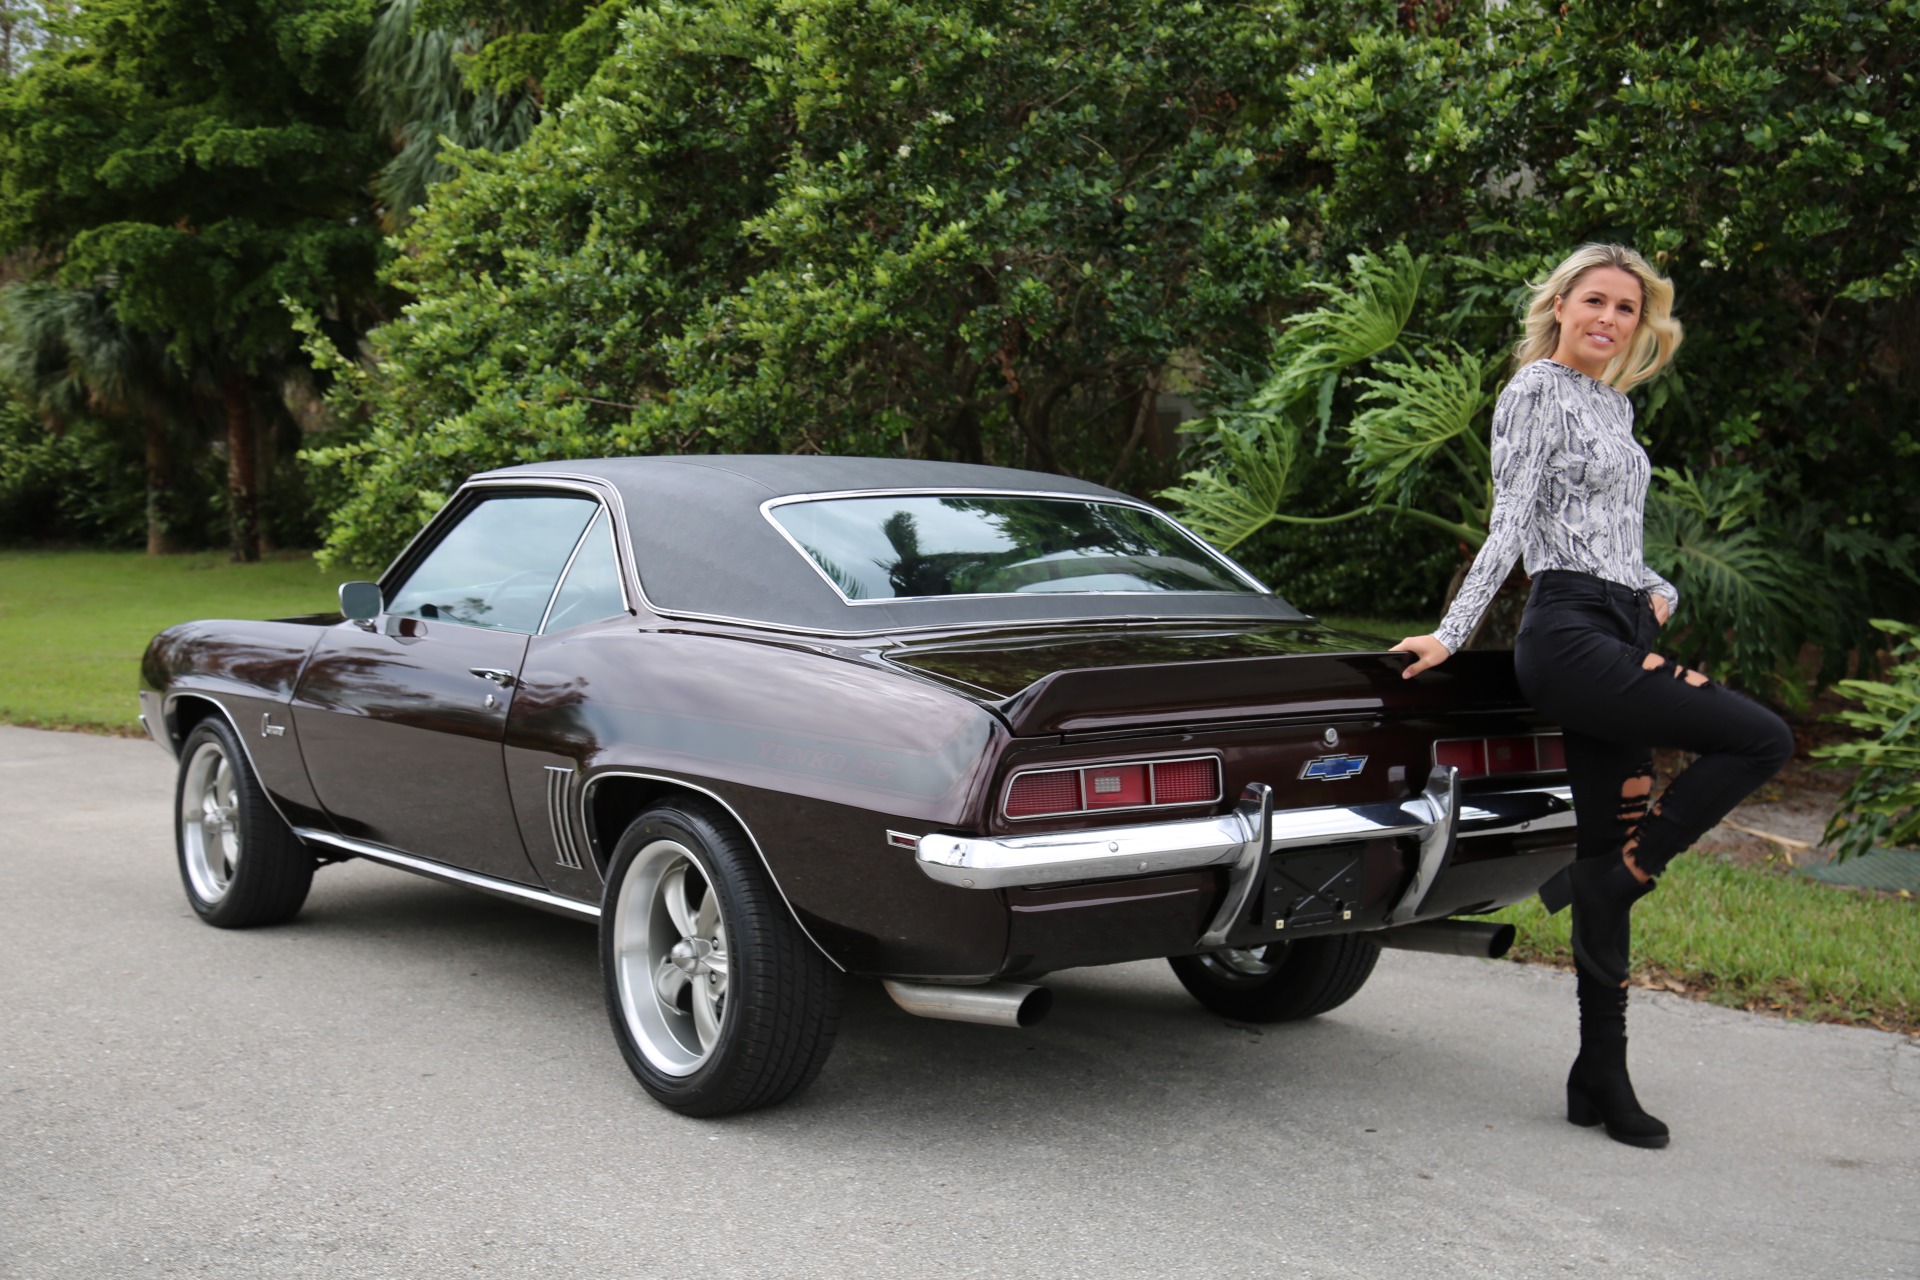 Used 1969 Chevrolet Camaro V8 4 Speed Manual for sale Sold at Muscle Cars for Sale Inc. in Fort Myers FL 33912 5